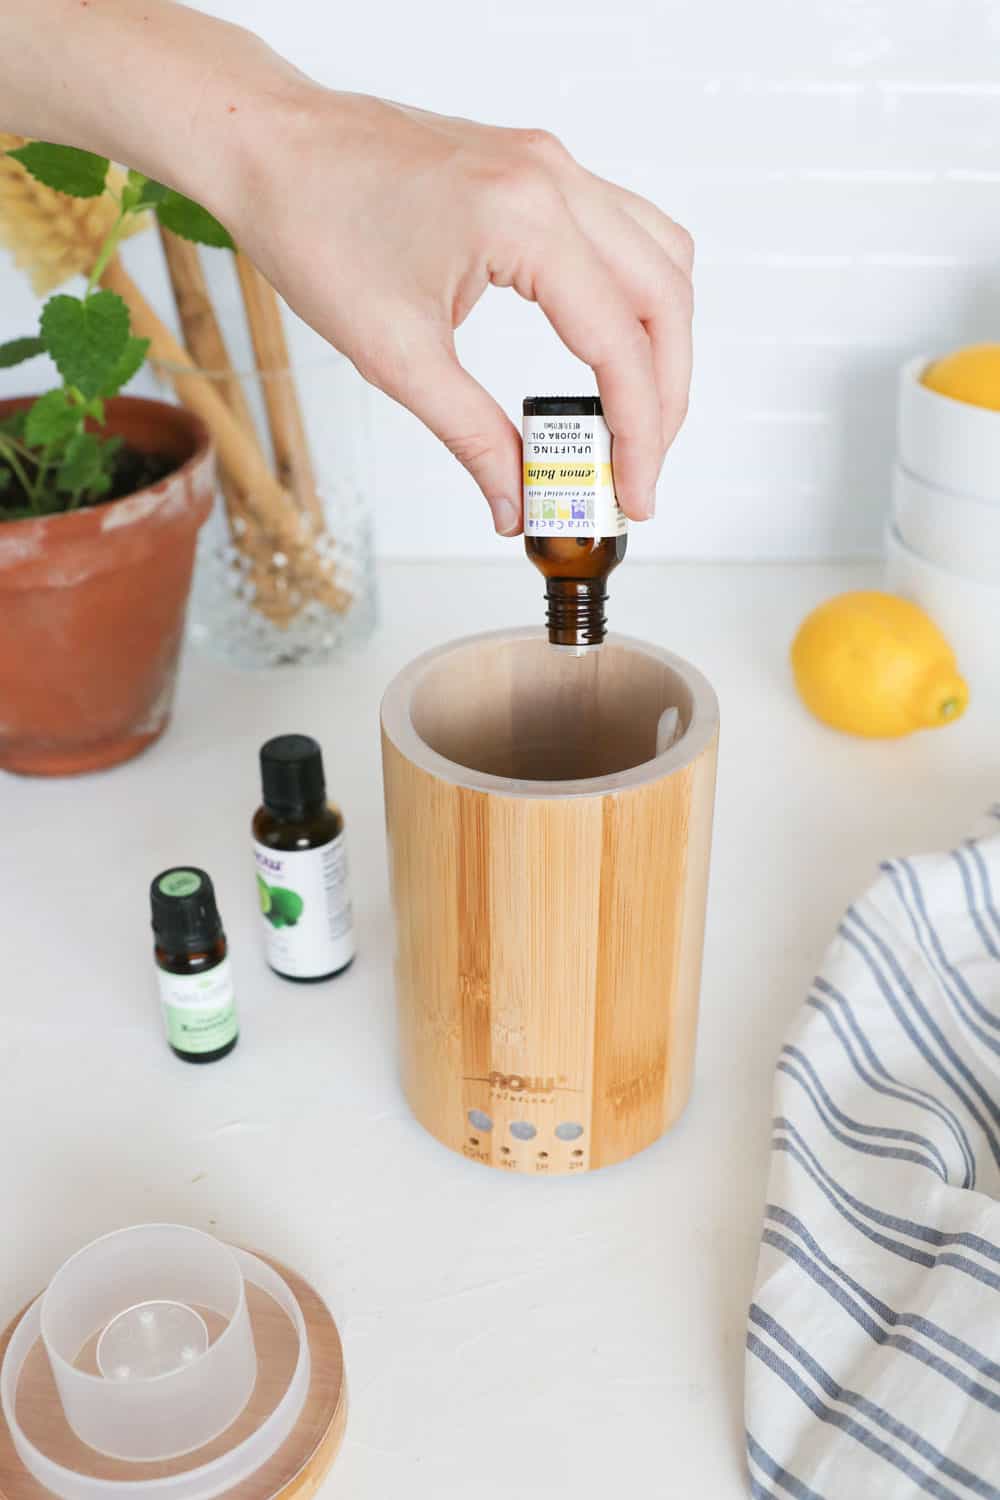 Benefits of Diffusing Essential oils